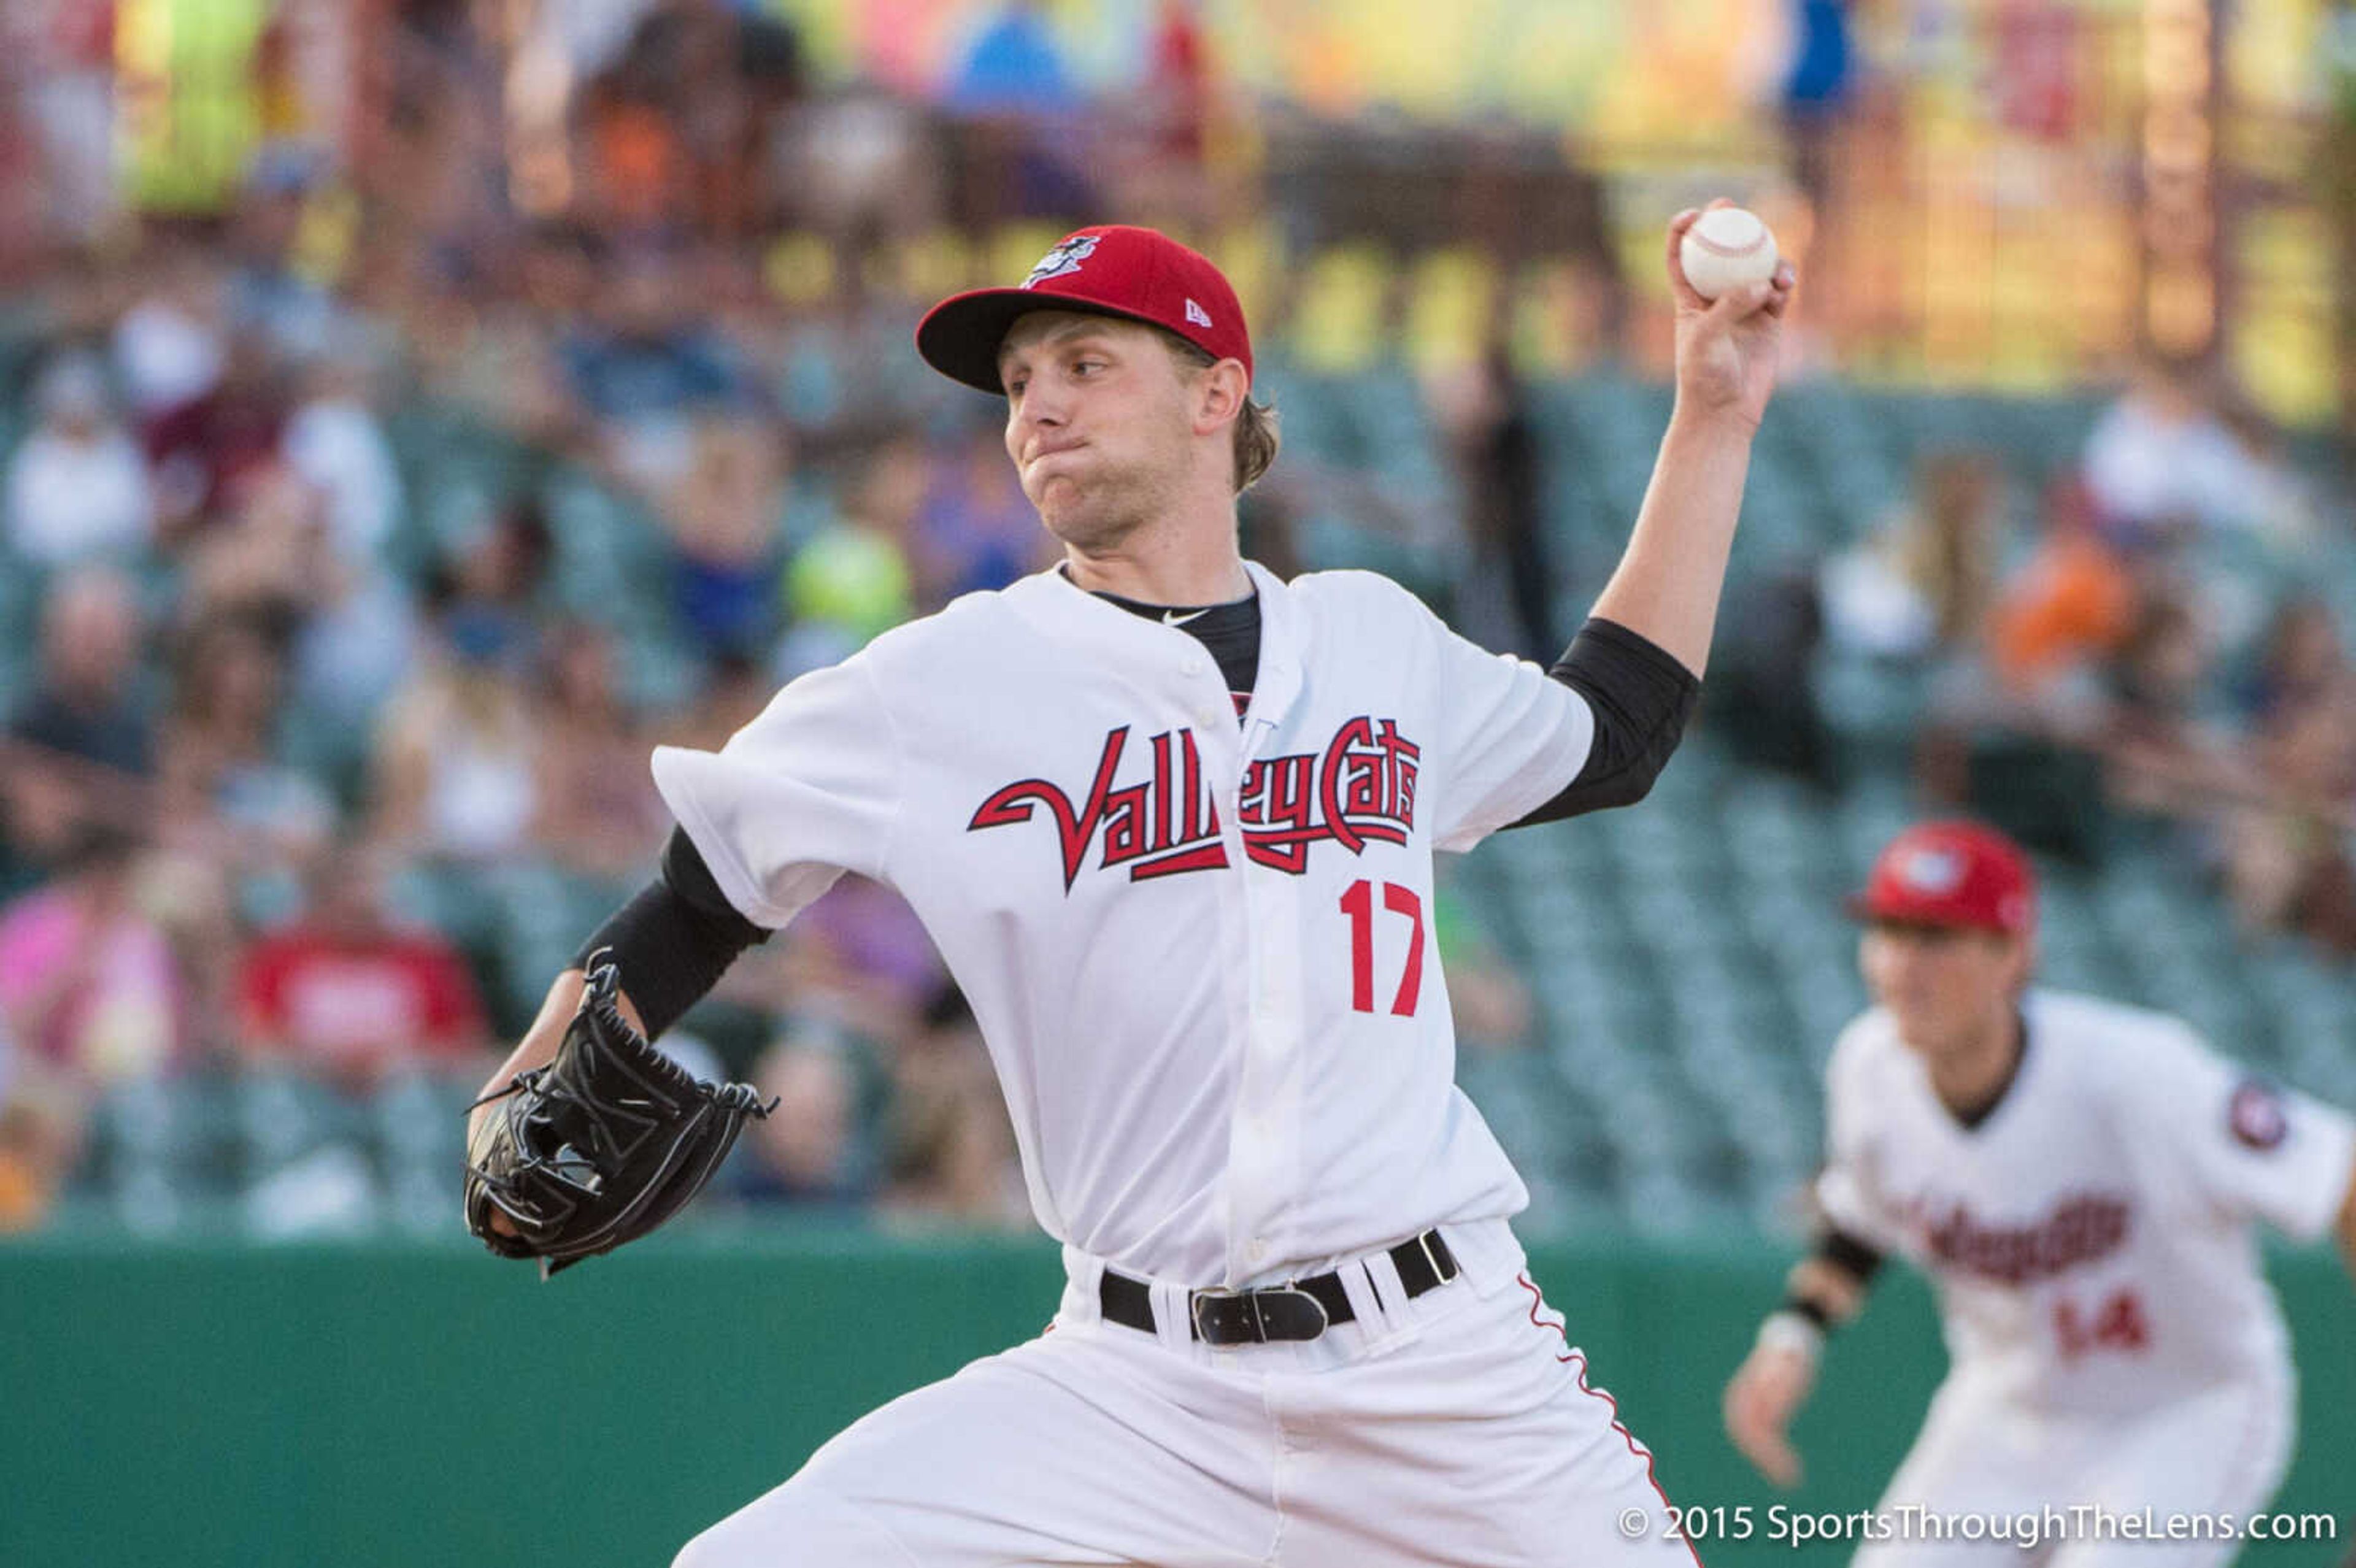 Alex Winkelman pitching for the Houston Astros' Class A Short affiliate, the Tri-City ValleyCats.